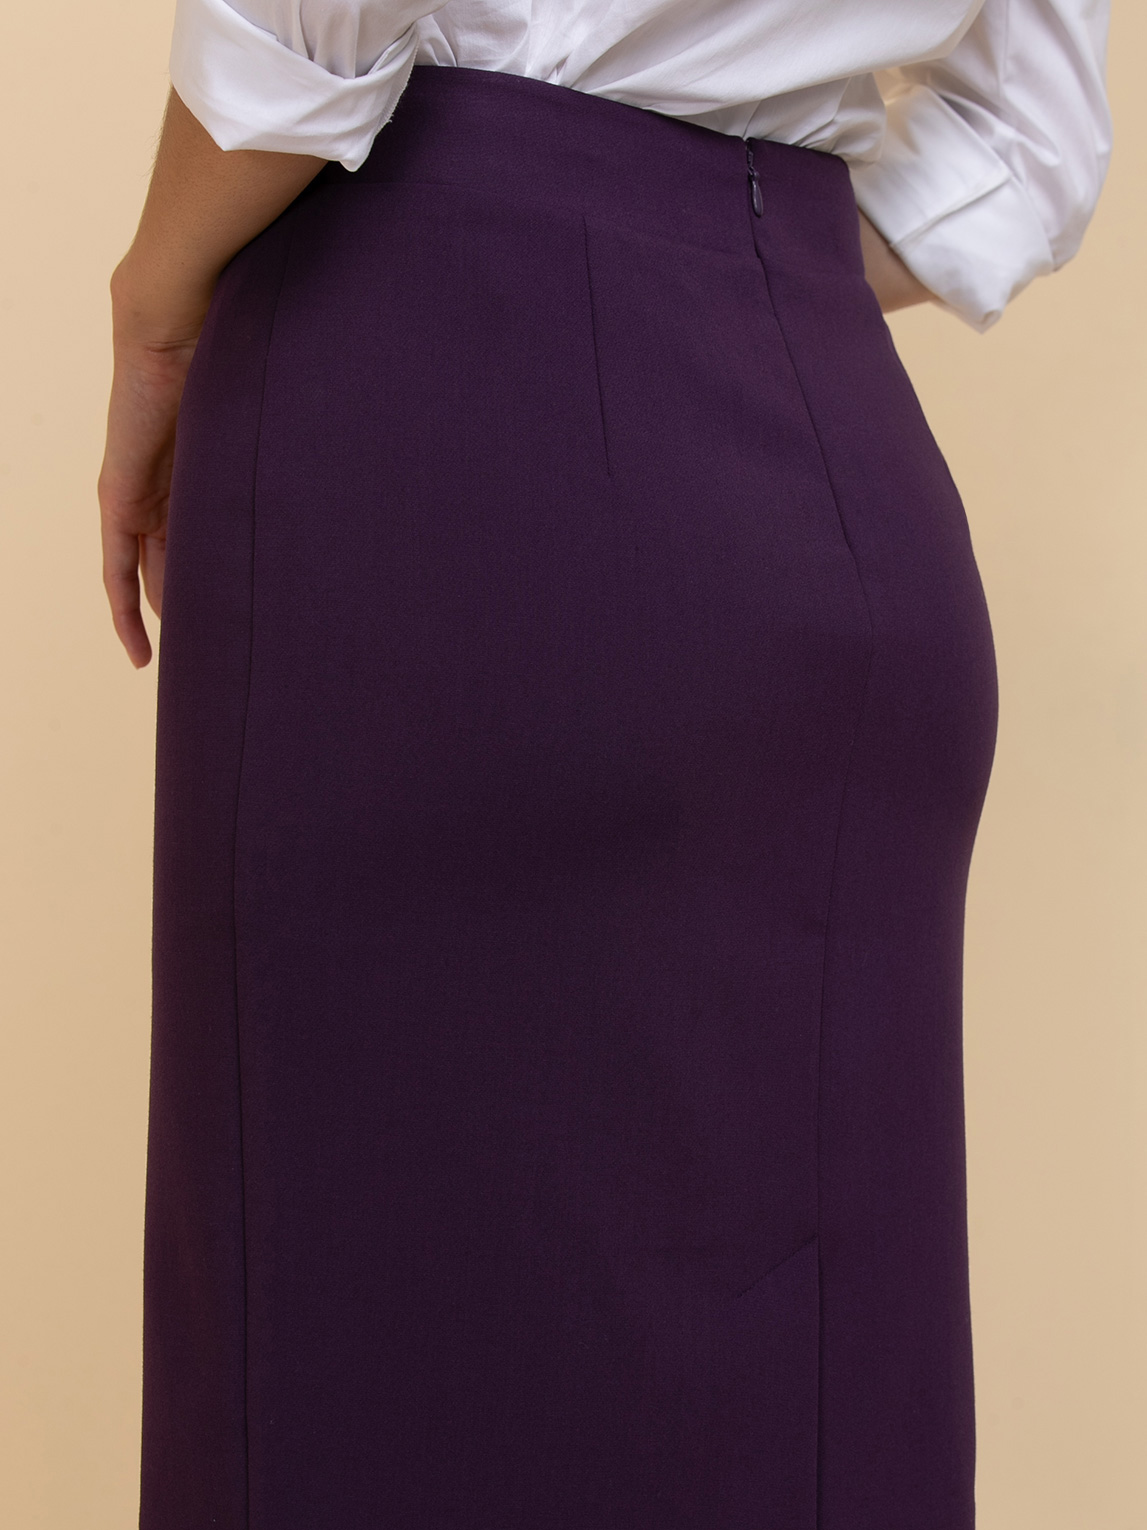 Basic Pencil Skirt in Pinstripe Luxe Tailored